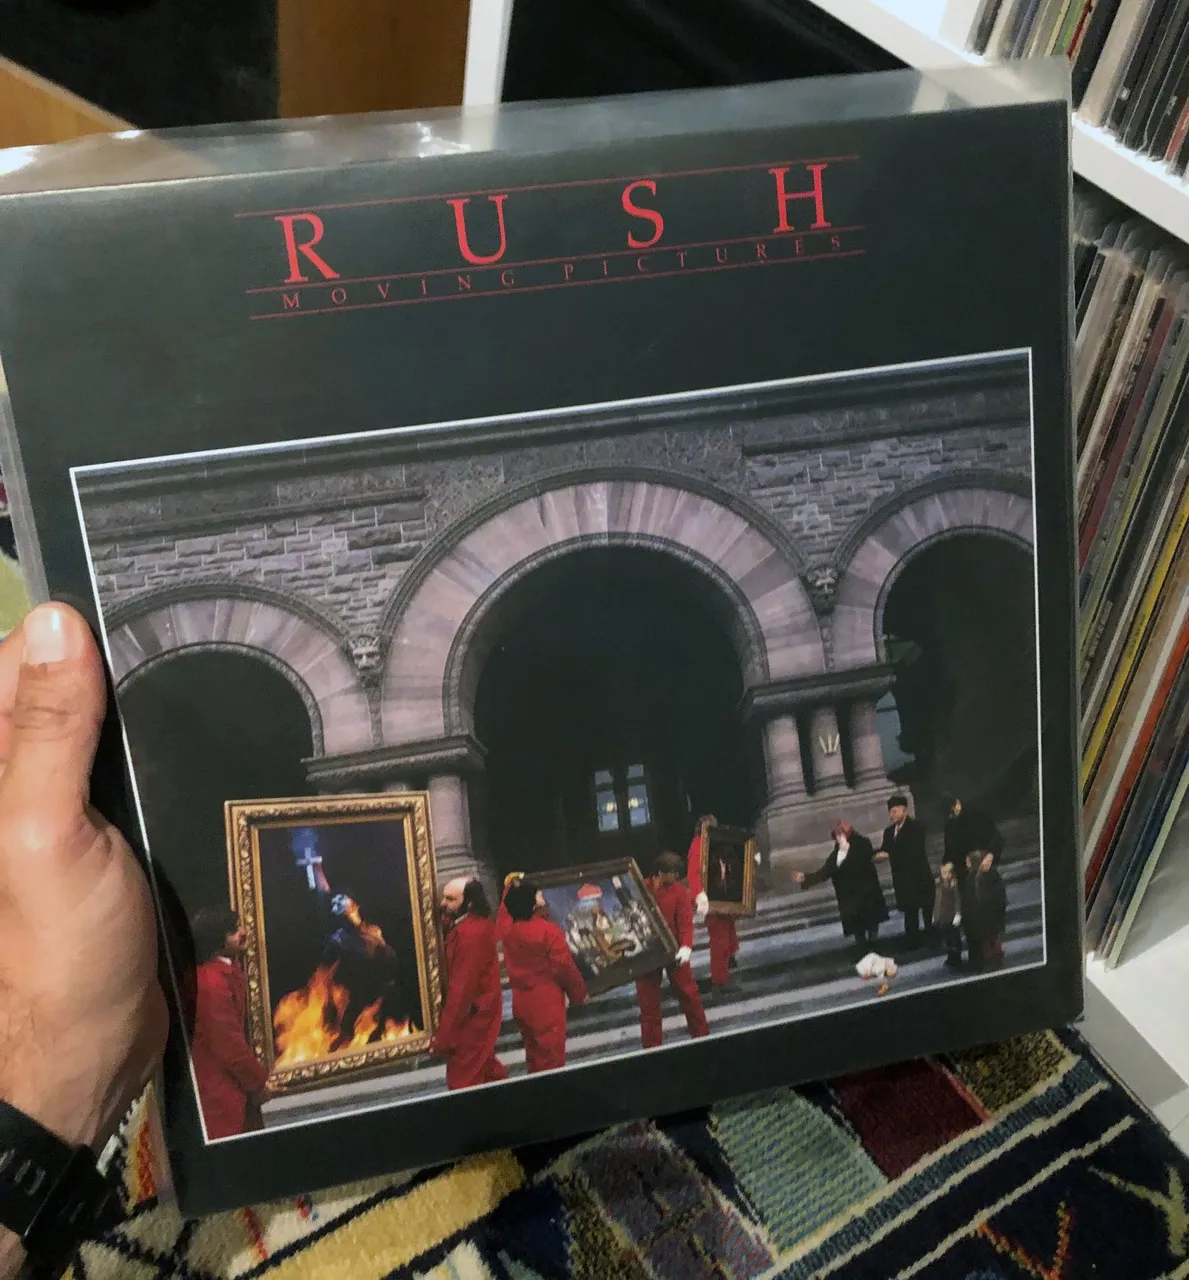 A Direct Metal Pressing of Rush's "Moving Pictures" album